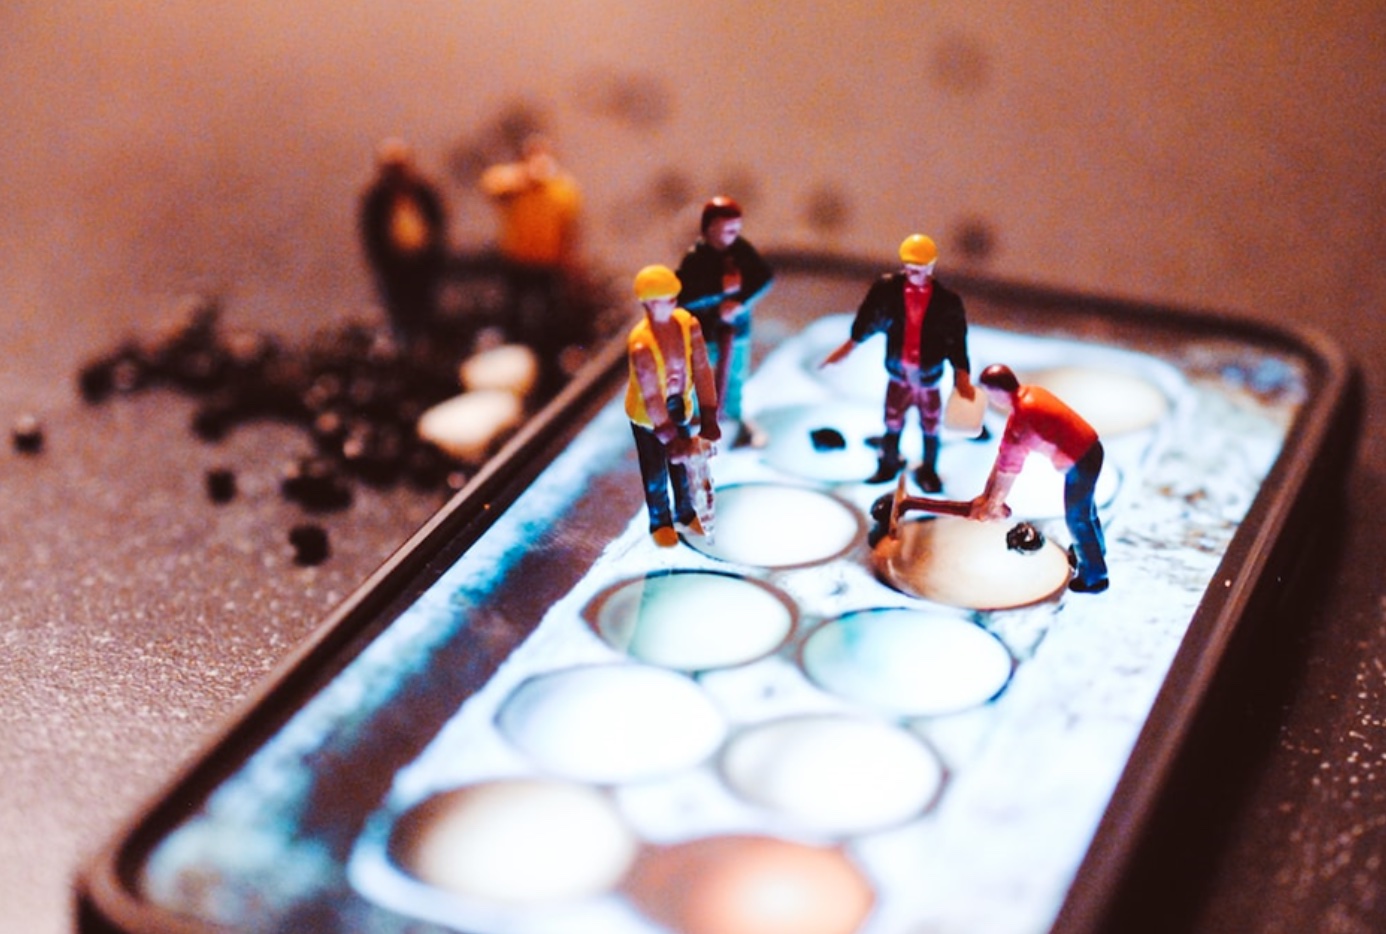 Tiny model construction workers, working on a mobile phone screen; image by Nik, via Unsplash.com